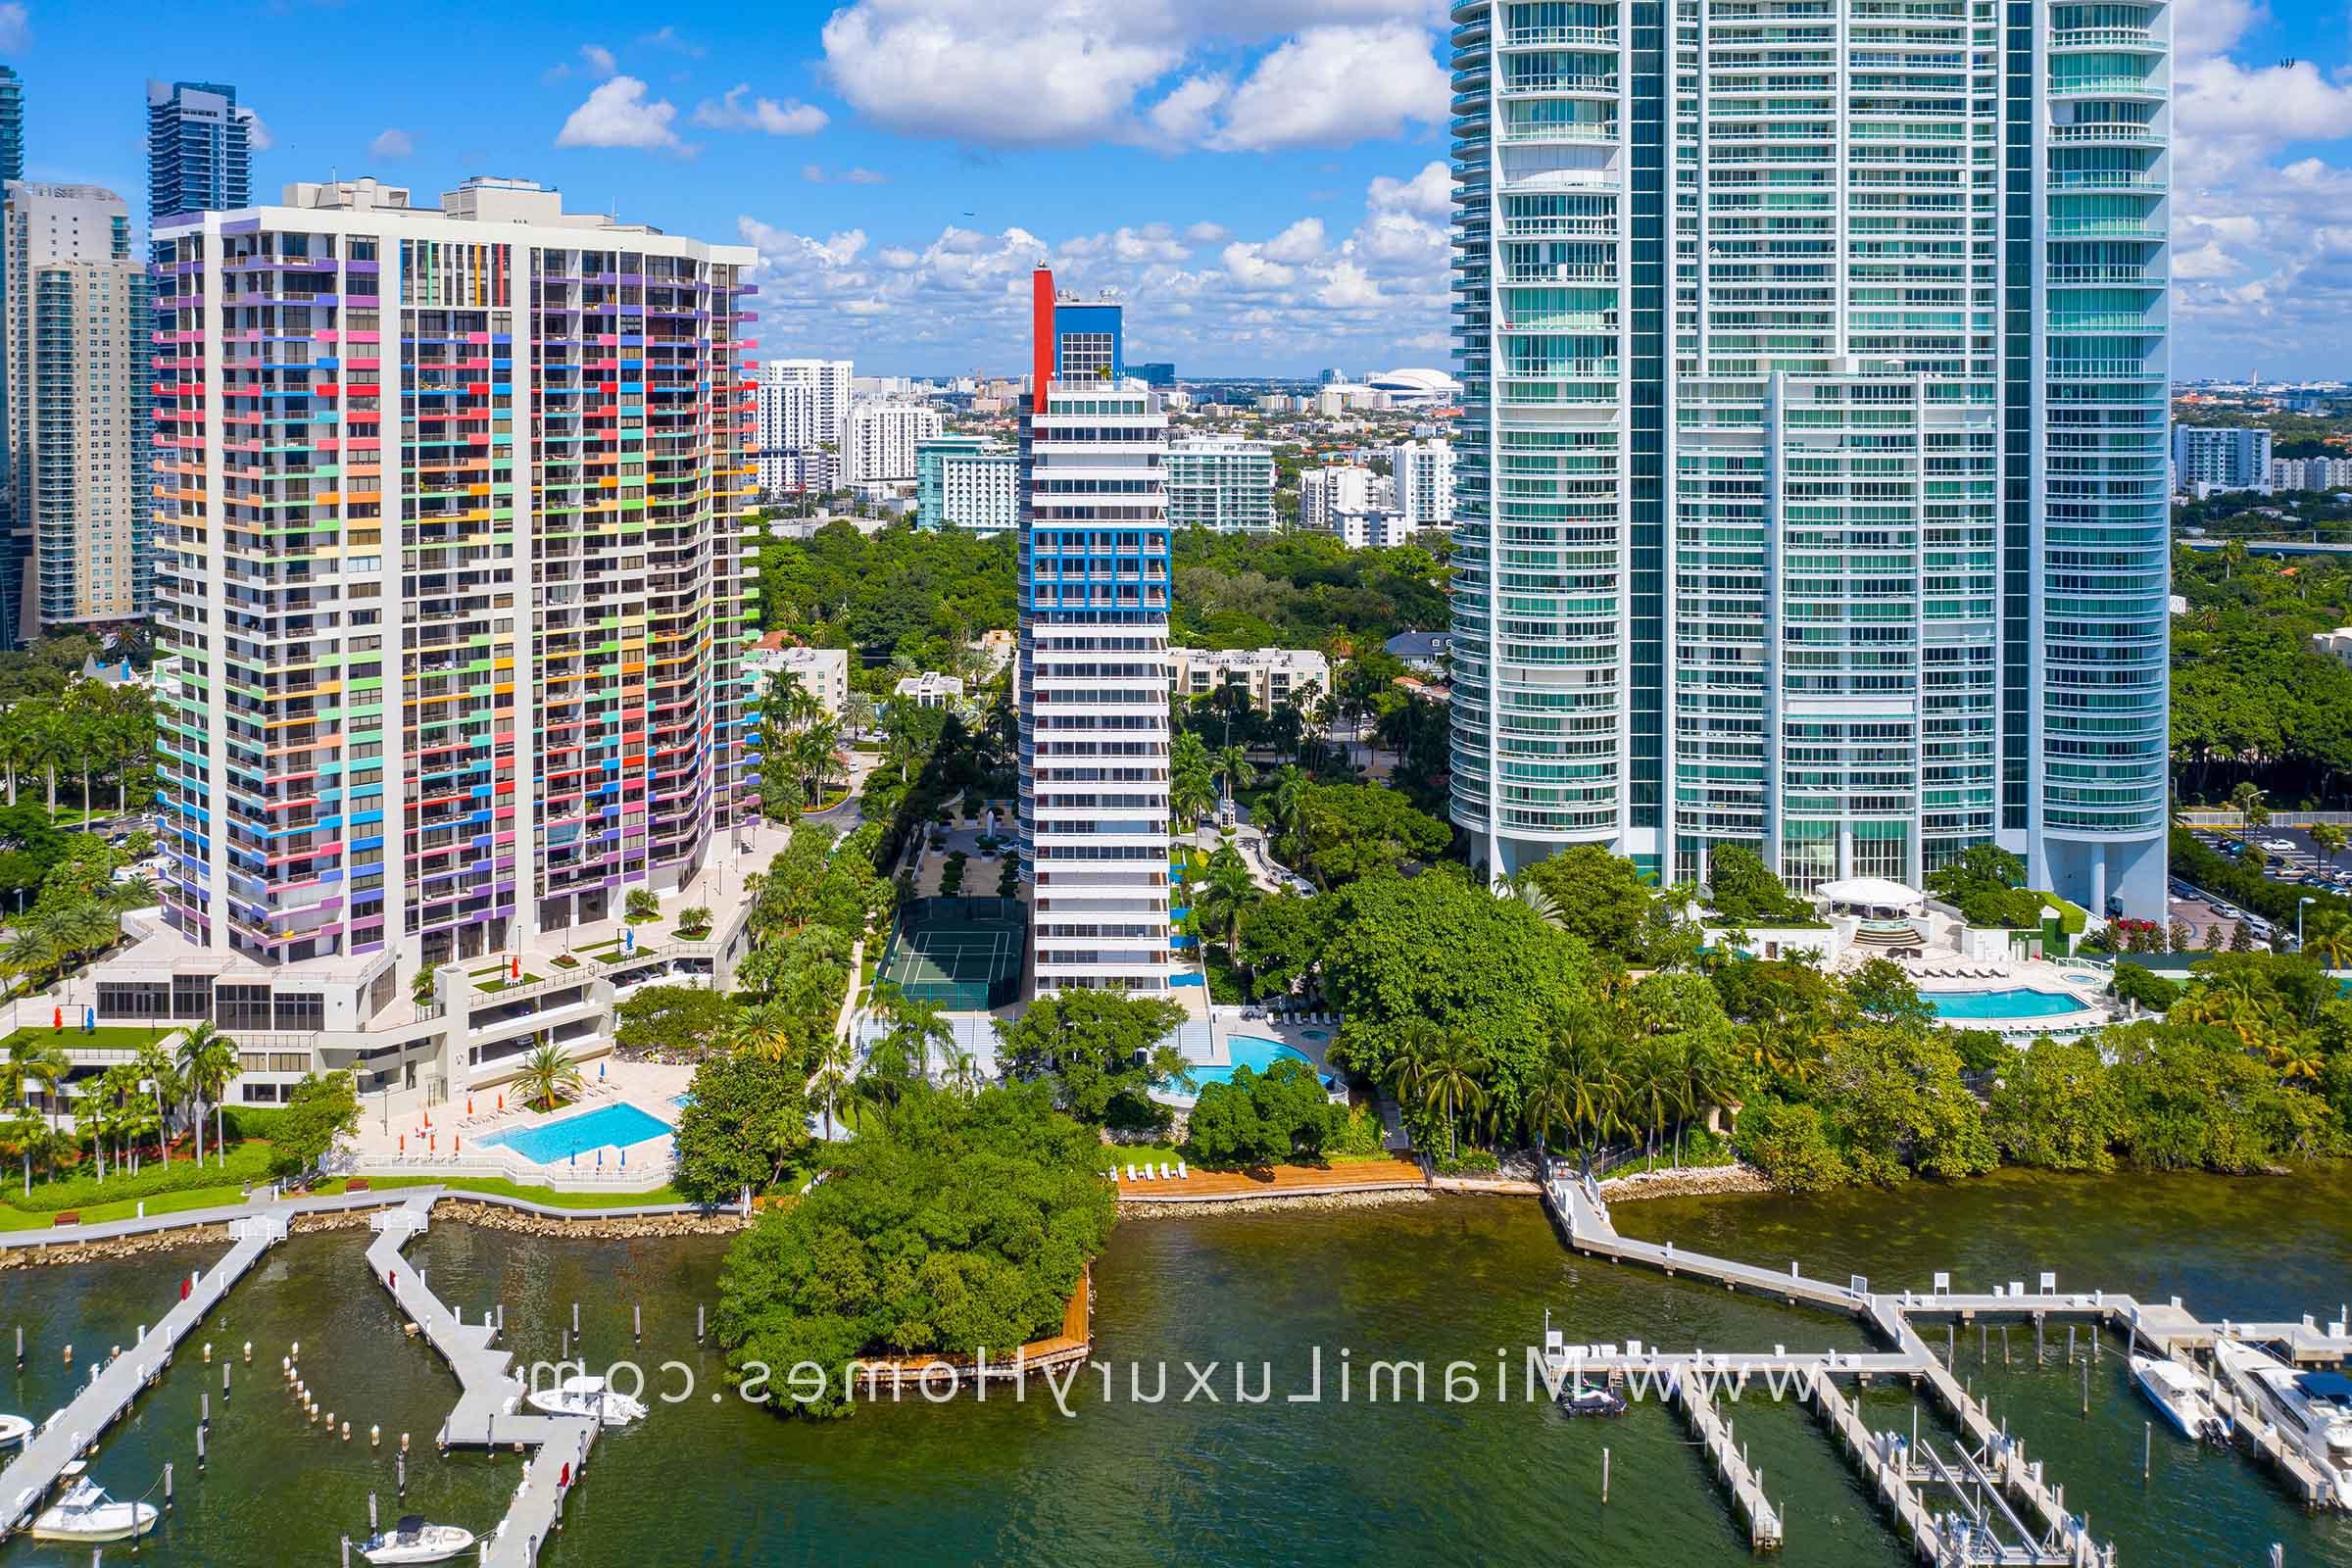 Aerial View of Imperial at Brickell温泉